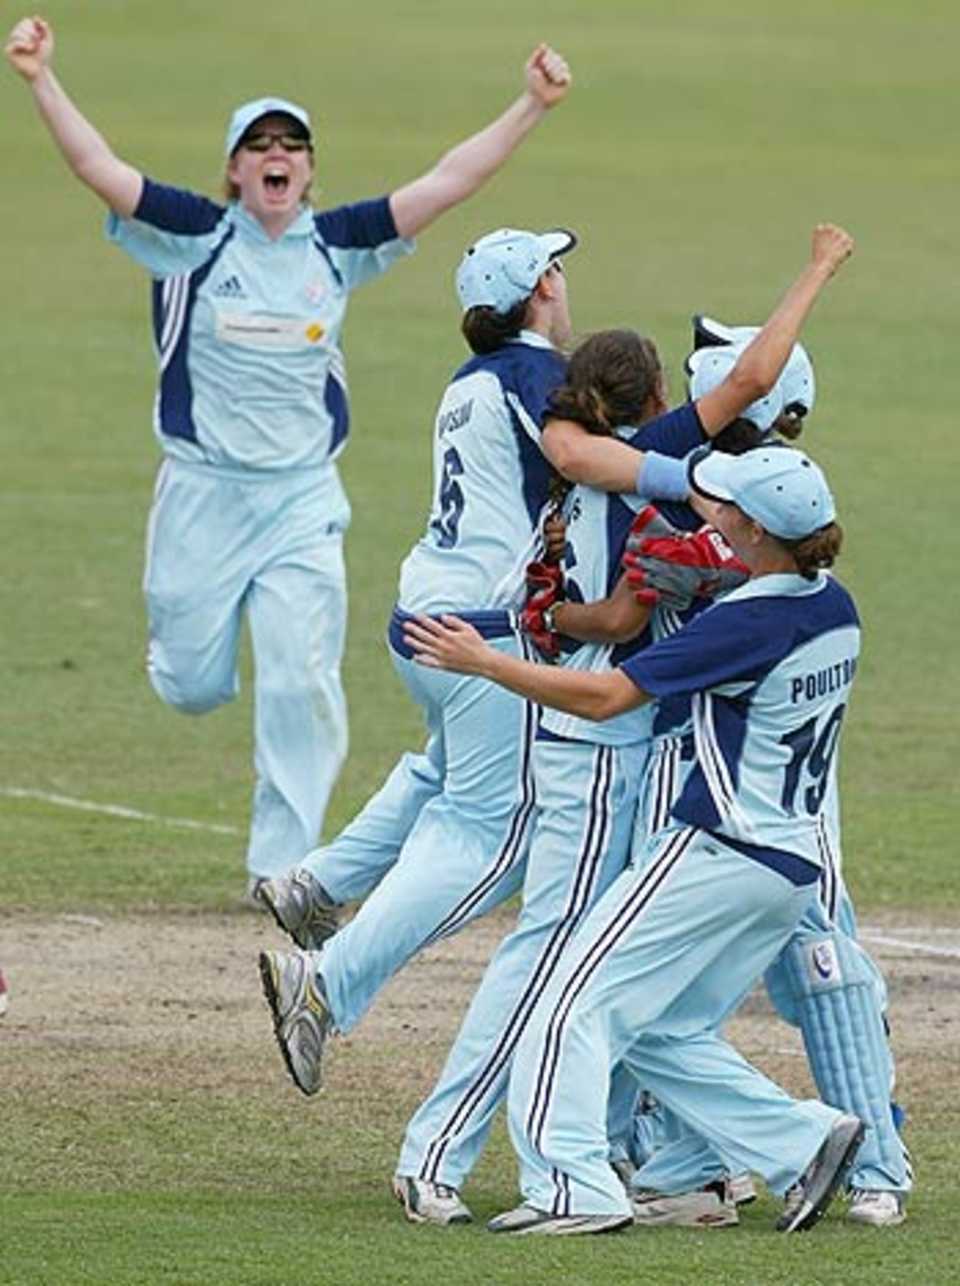 NSW cricketers celebrate their thrilling win over Queensland, New South Wales Women v Queensland Women, 3rd Final, Women's National Cricket League, February 5, 2006